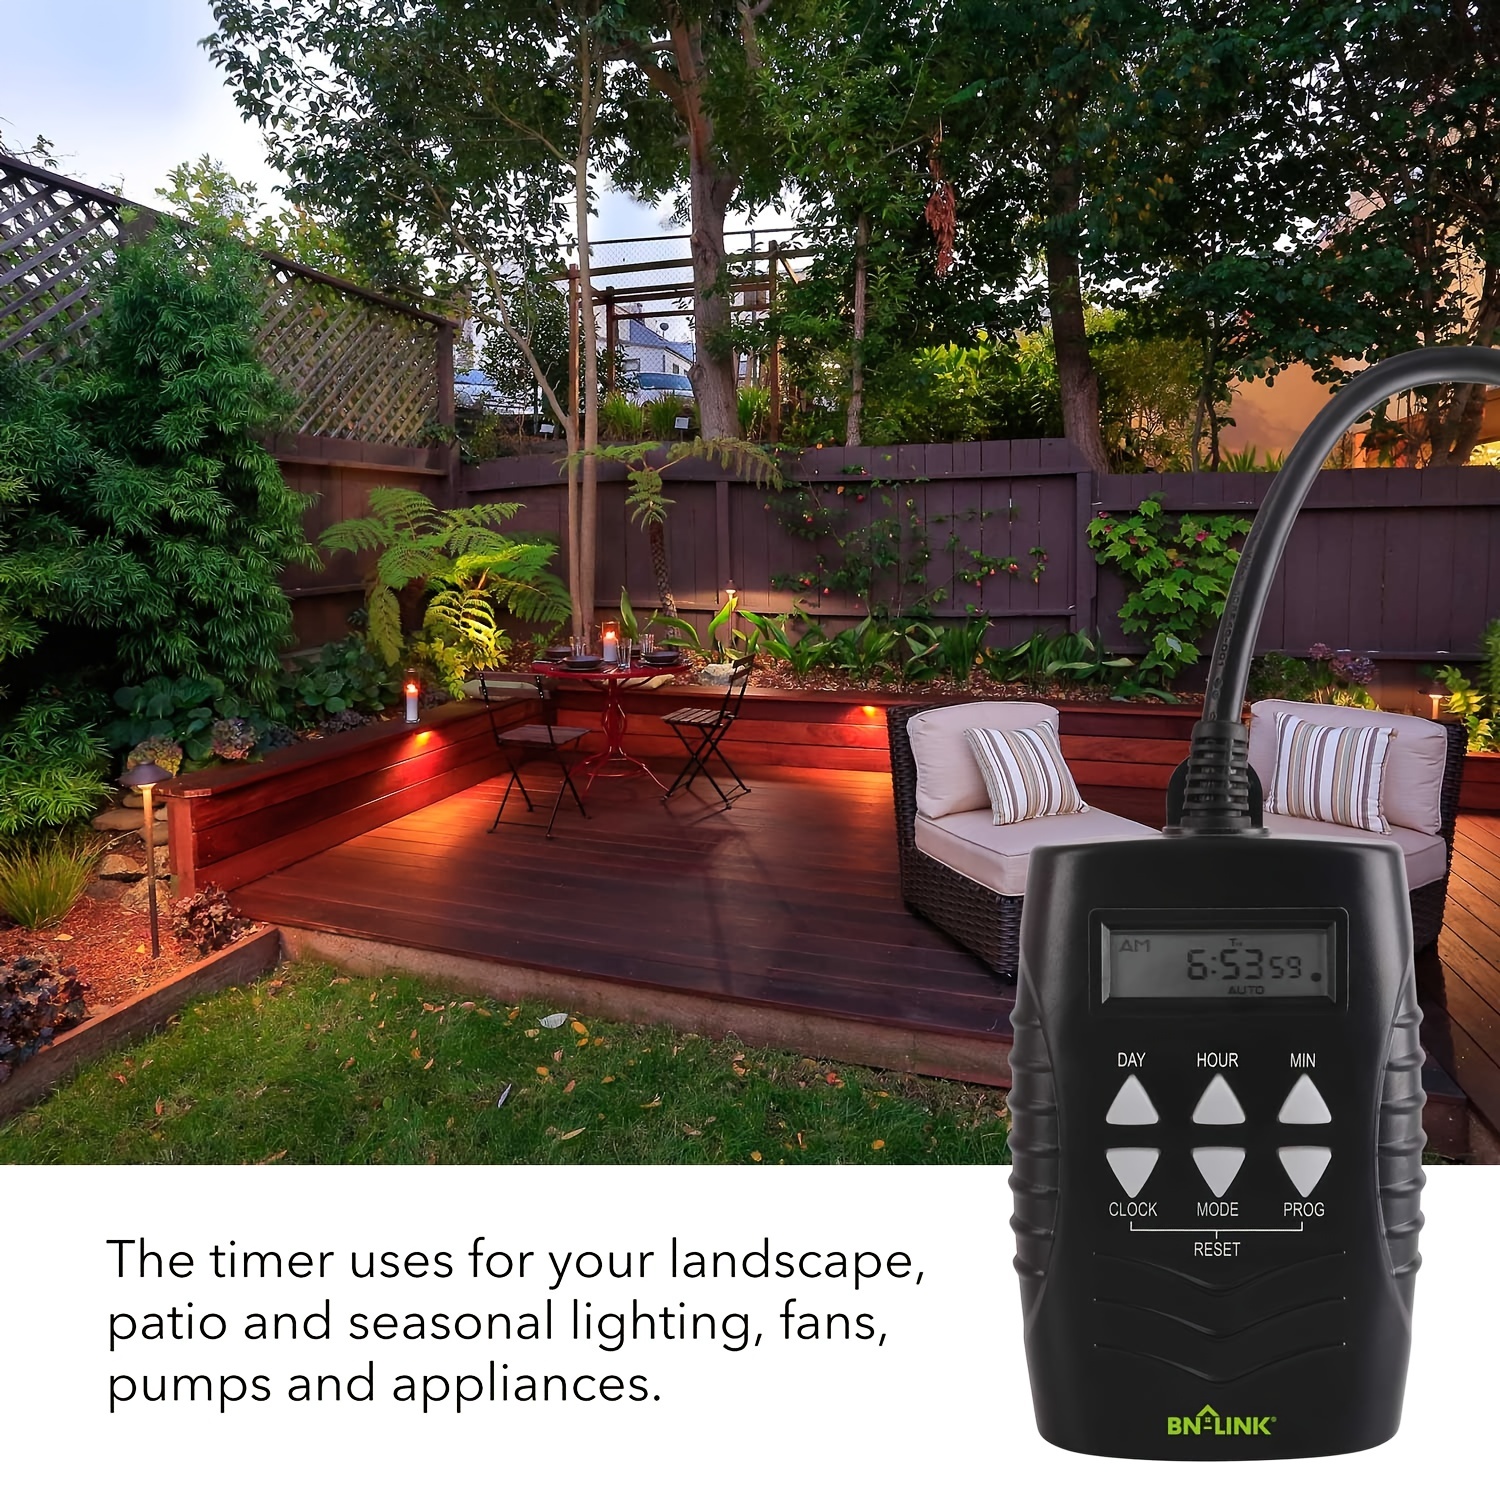 Review: BN-LINK 7 Day Outdoor Heavy Duty Digital Programmable